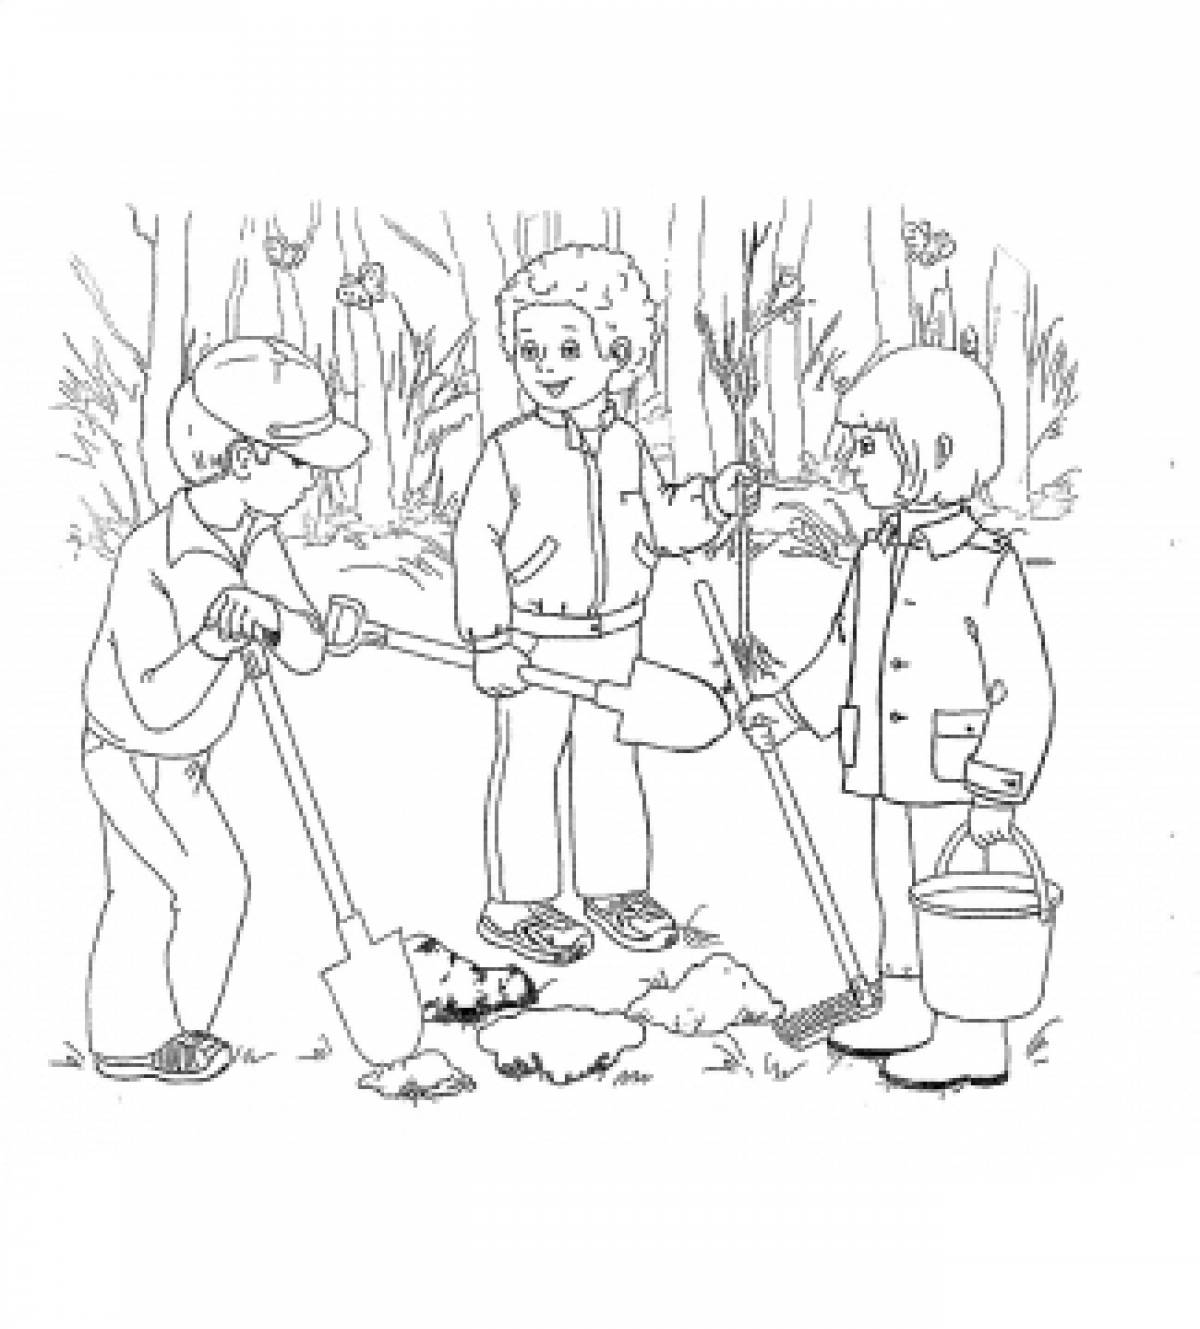 May 1 children plant trees